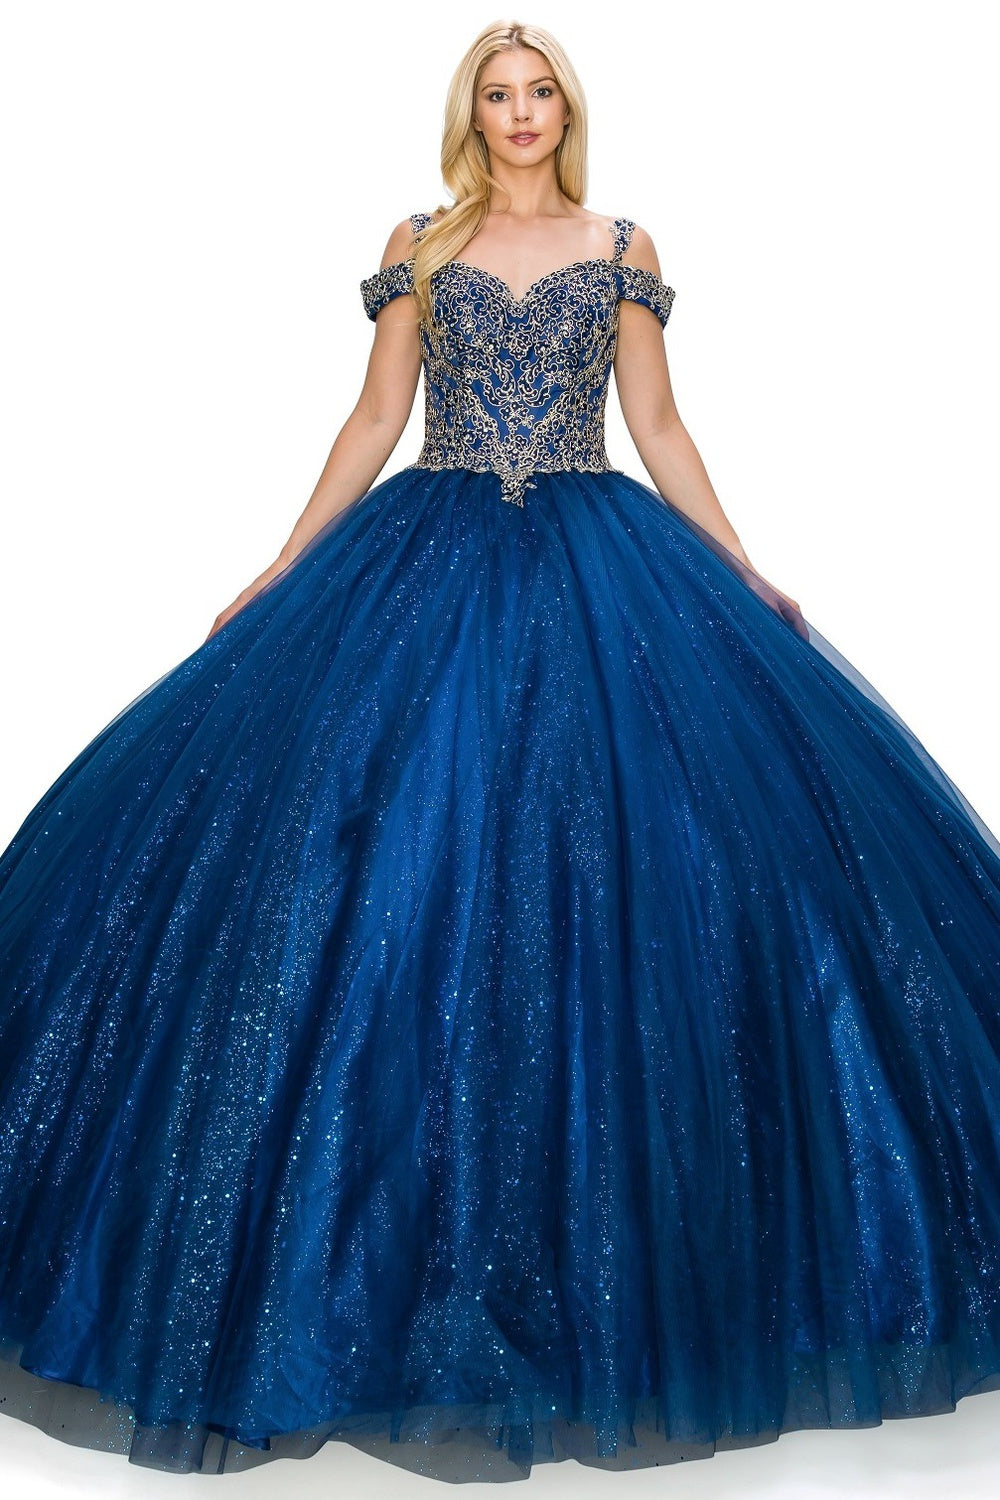 Off the Shoulder Rhinestone Tulle Quinceanera Dress by Cinderella Couture USA AS8028J_NAV